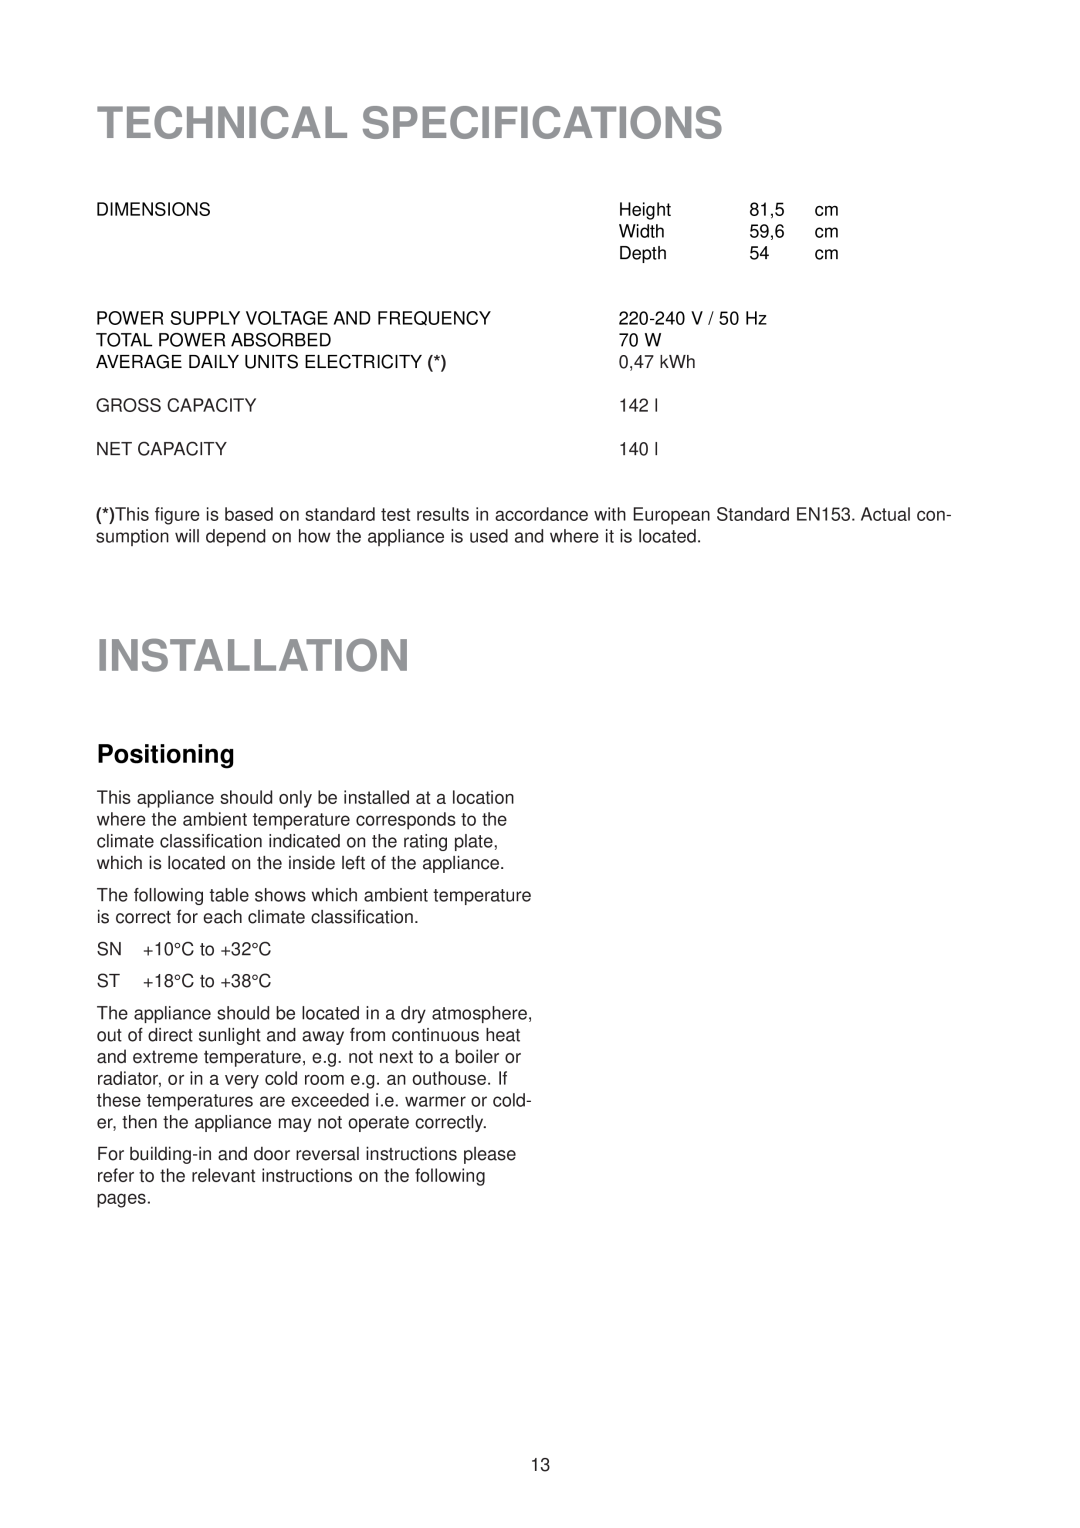 Zanussi ZUD 9154 manual Technical Specifications, Installation, Positioning 